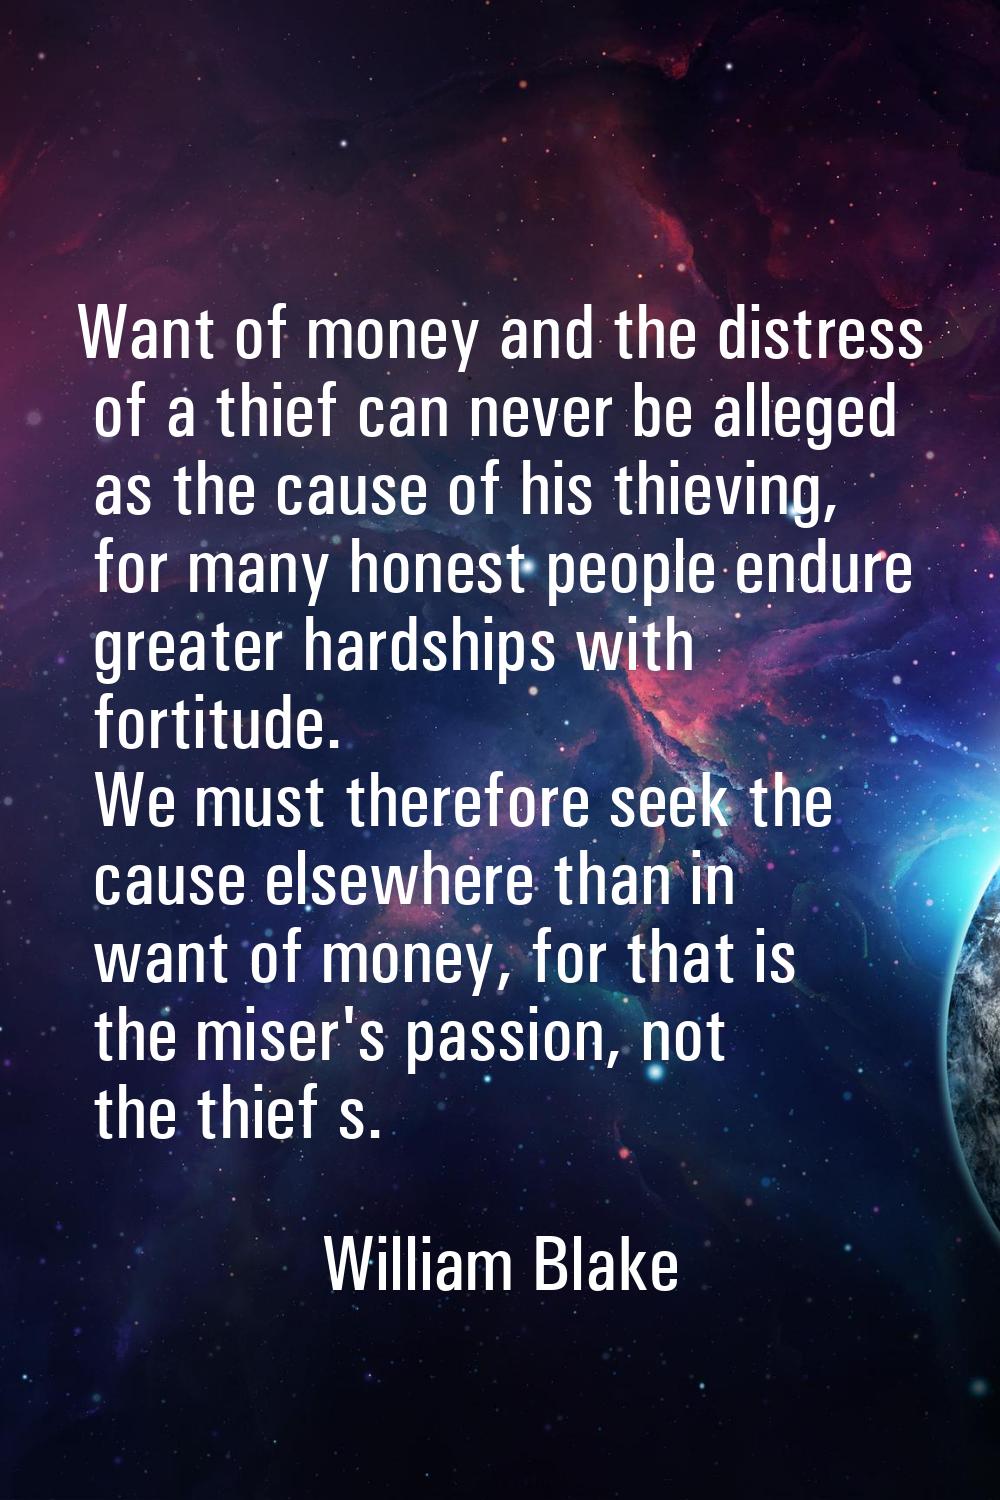 Want of money and the distress of a thief can never be alleged as the cause of his thieving, for ma